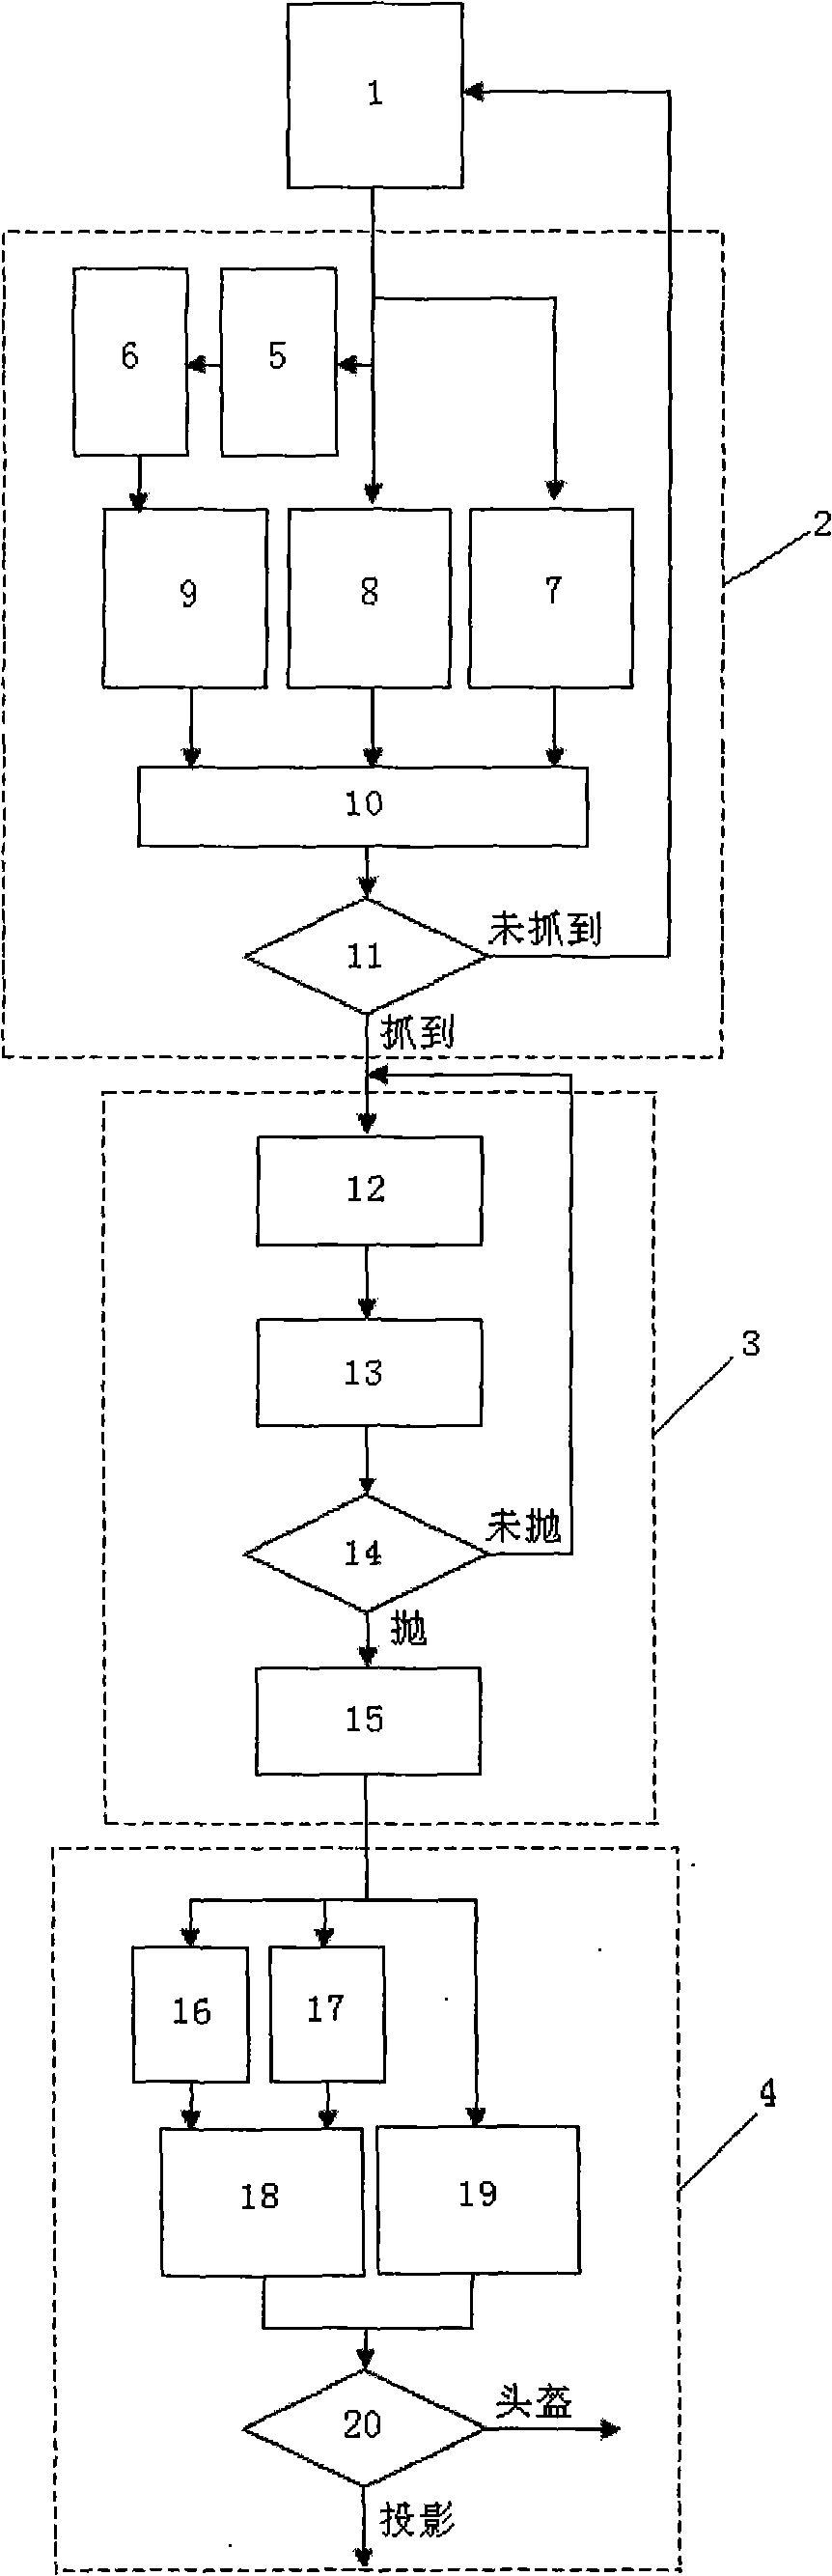 Human-computer interaction method for grapping and throwing dummy object and system thereof